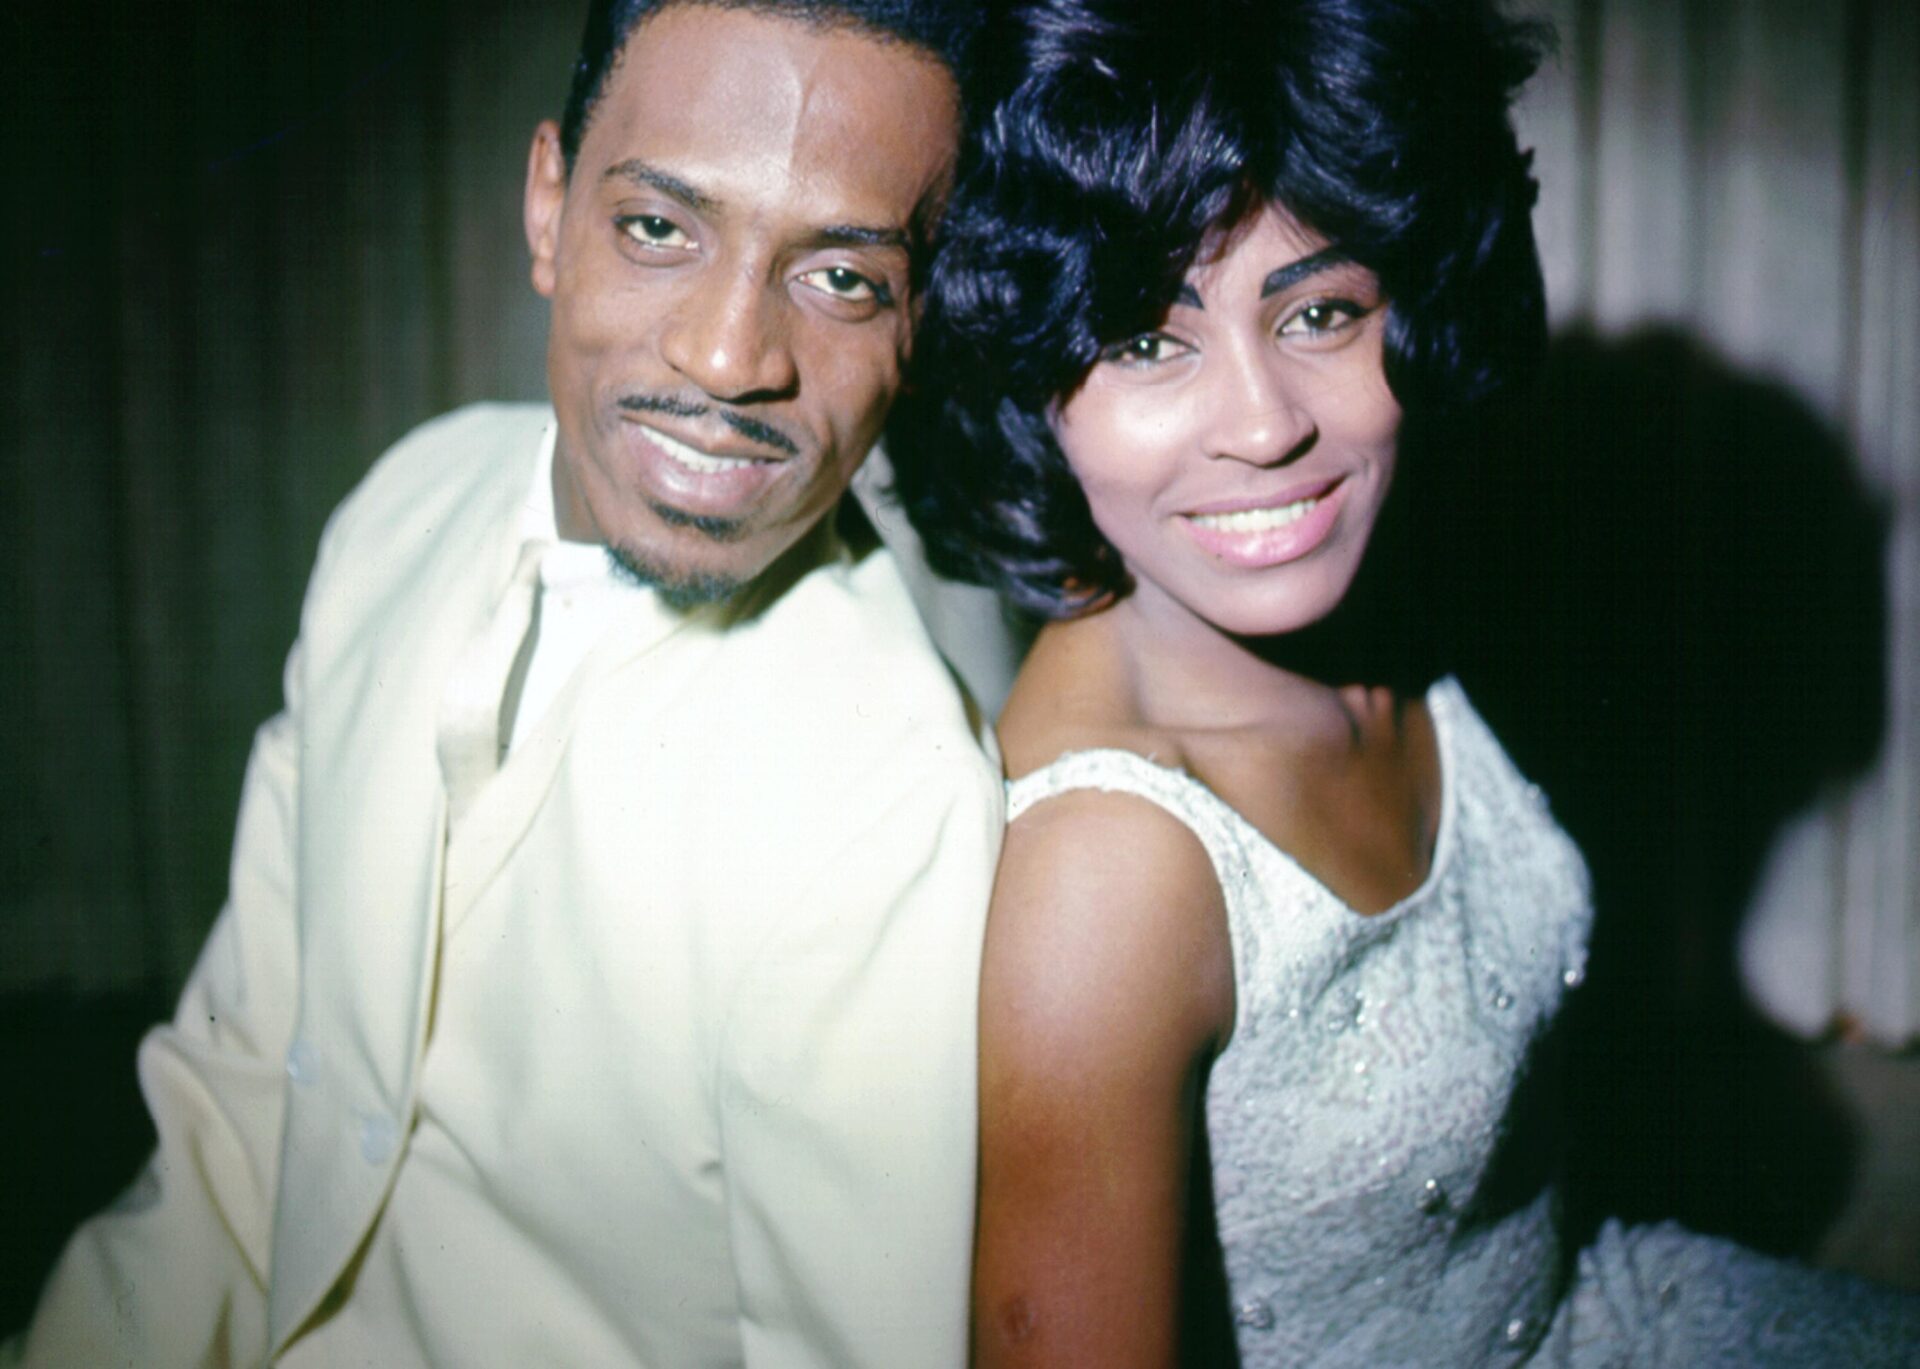 Ike & Tina Turner pose for a portrait in circa 1963 - Michael Ochs Archives // Getty Images